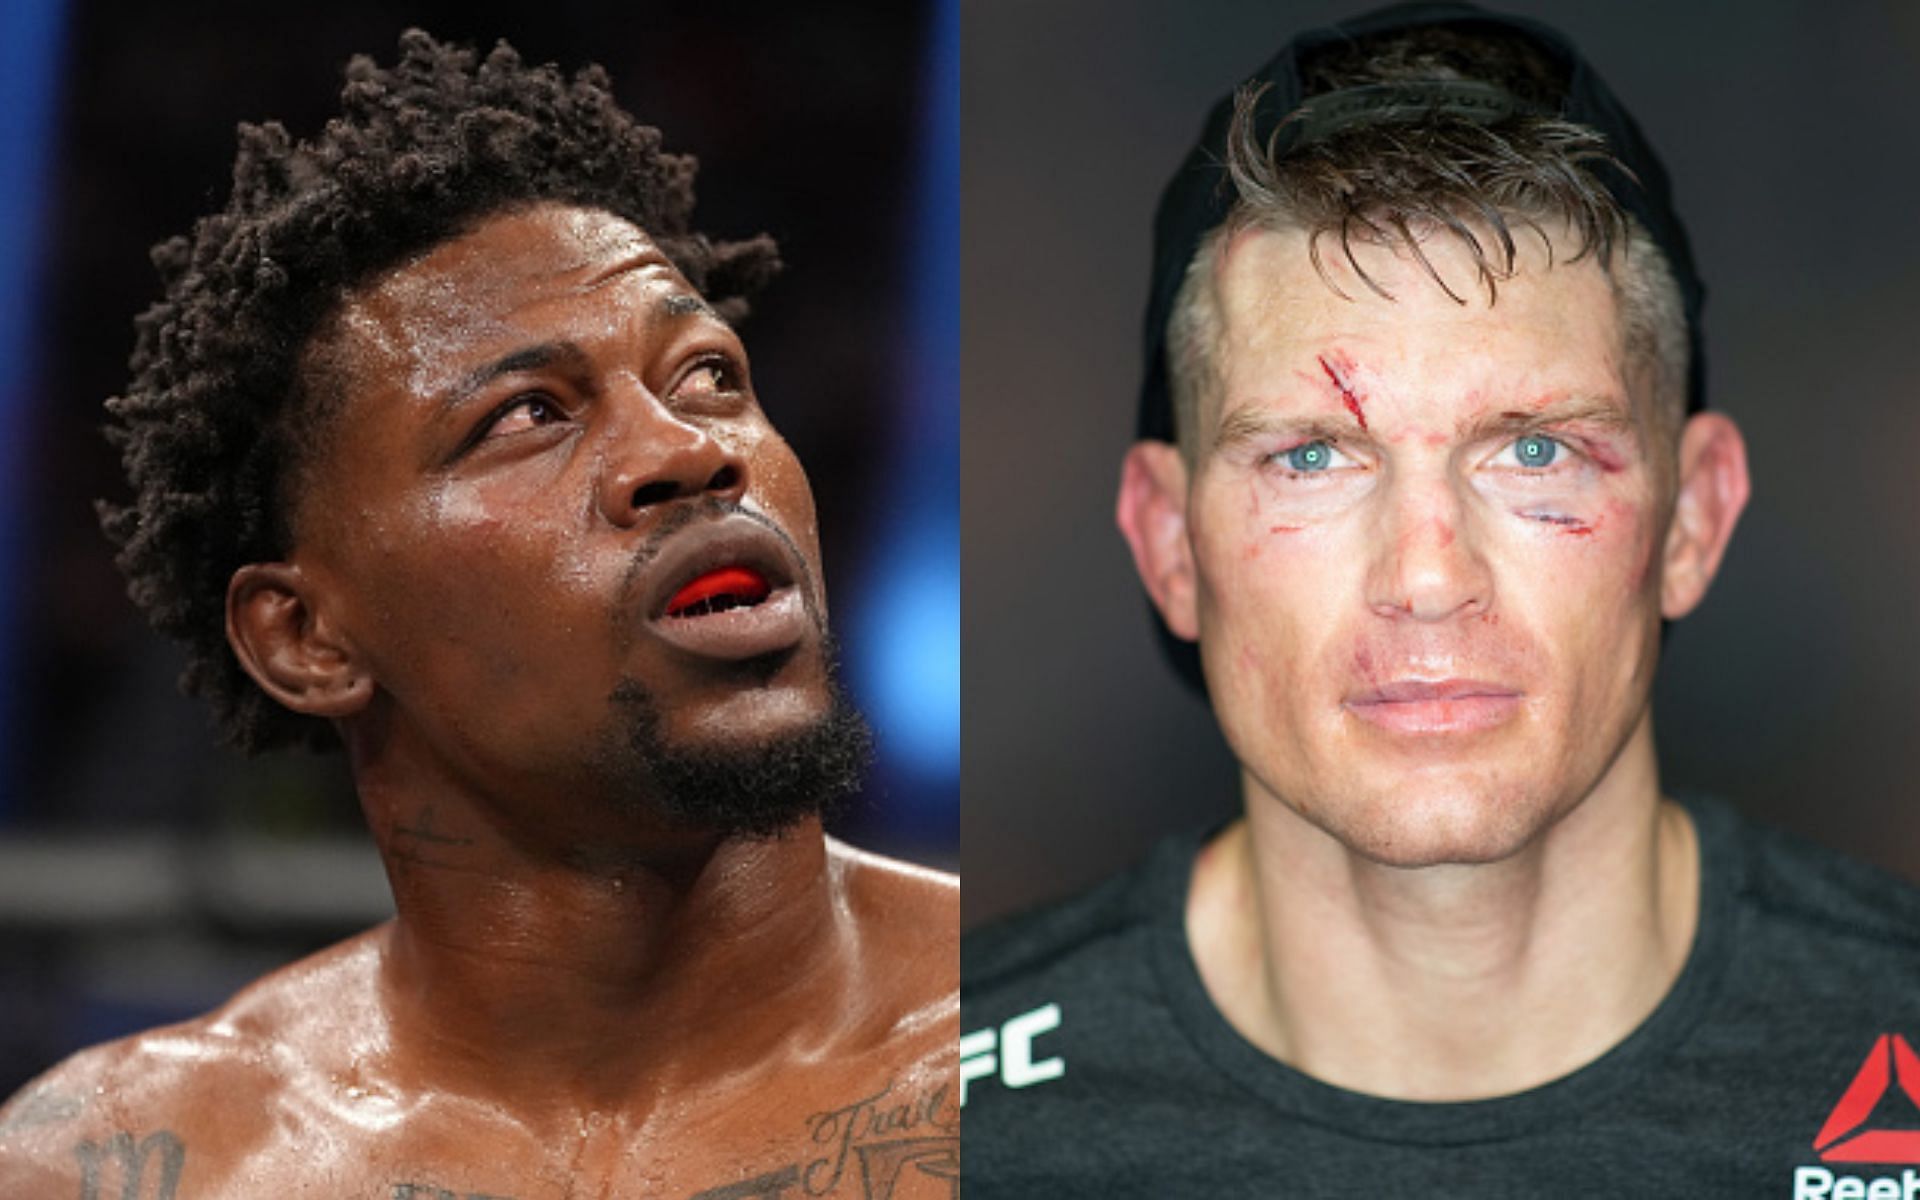 Stephen Thompson far from done with title aspirations, says he looks forward to facing “murderous row” starting with Kevin Holland – “I’m two or three fights away from a title shot”